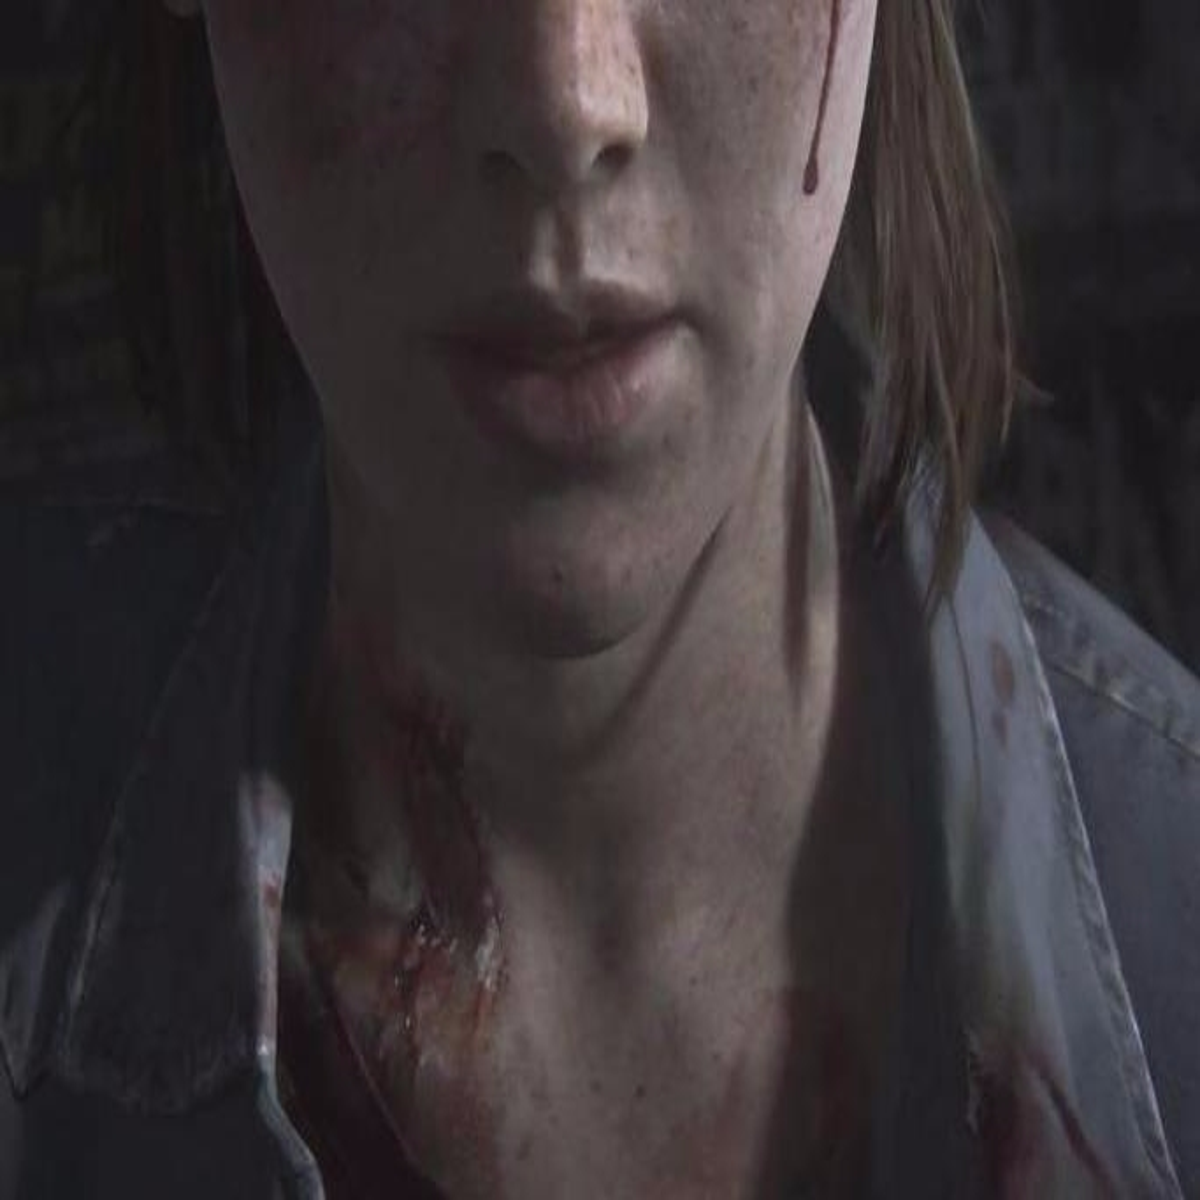 How old is Ellie in The Last of Us Part 2?